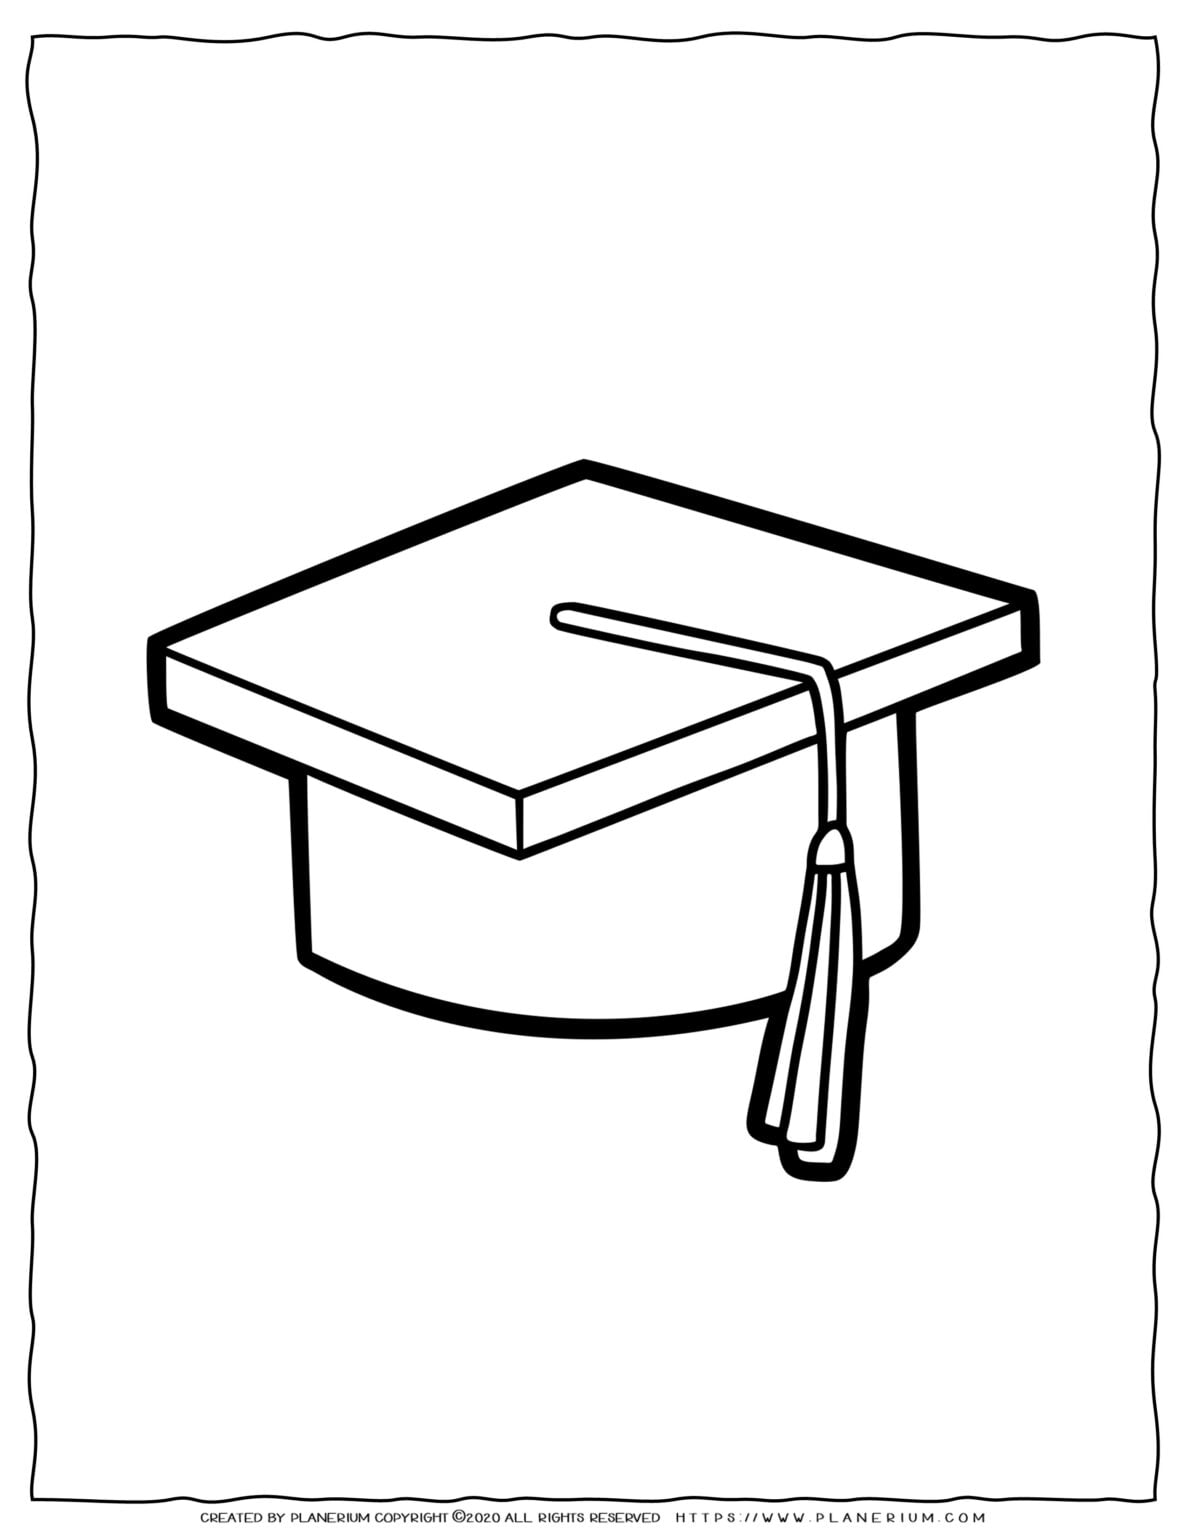 Fun Graduation Hat Coloring Page for Kids - Celebrate End of Year